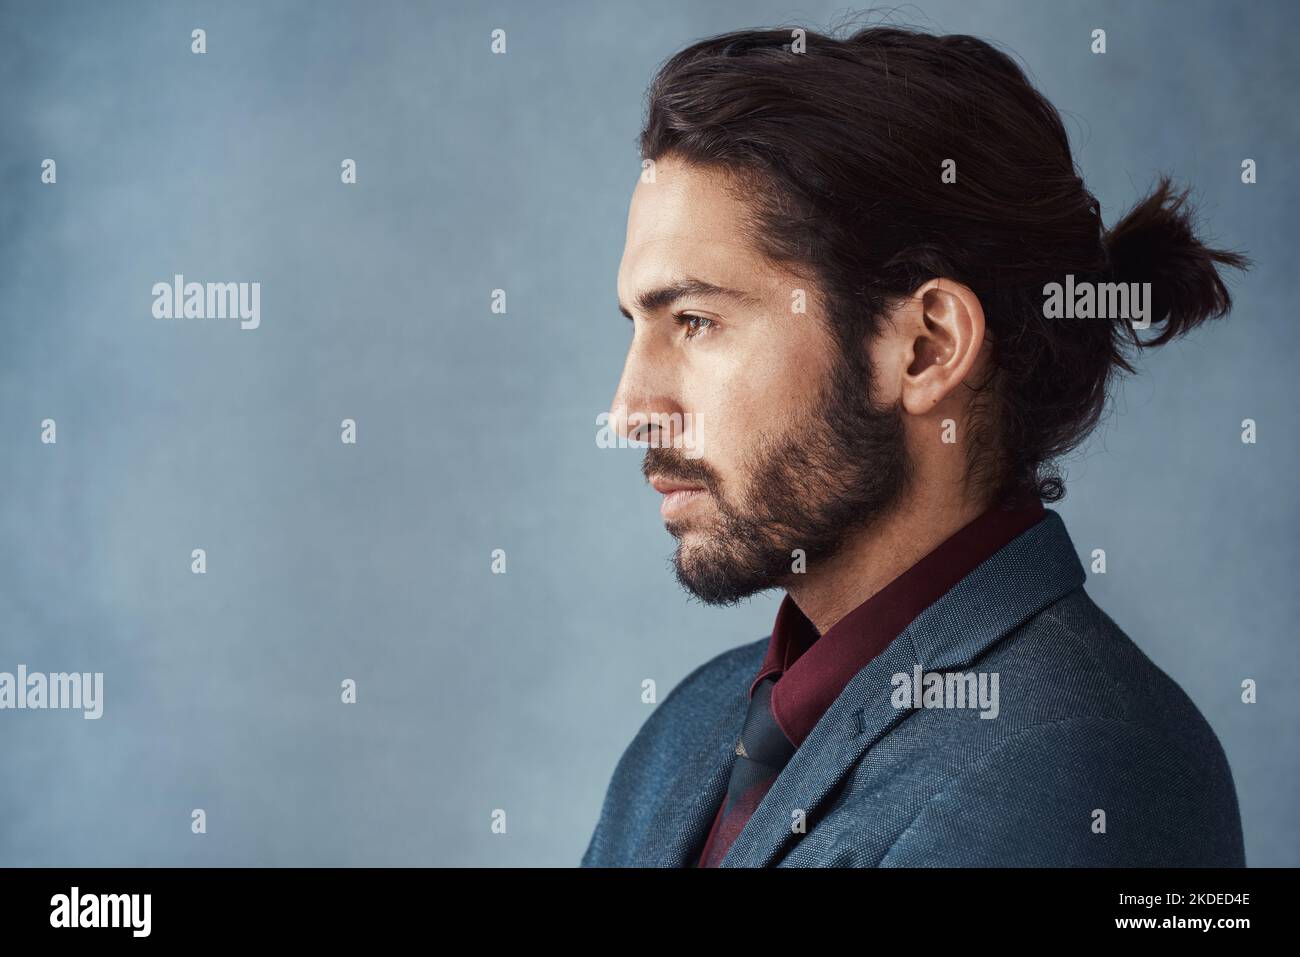 He knows how to wear a man bun. Studio shot of a handsome young man looking thoughtful against a grey background. Stock Photo